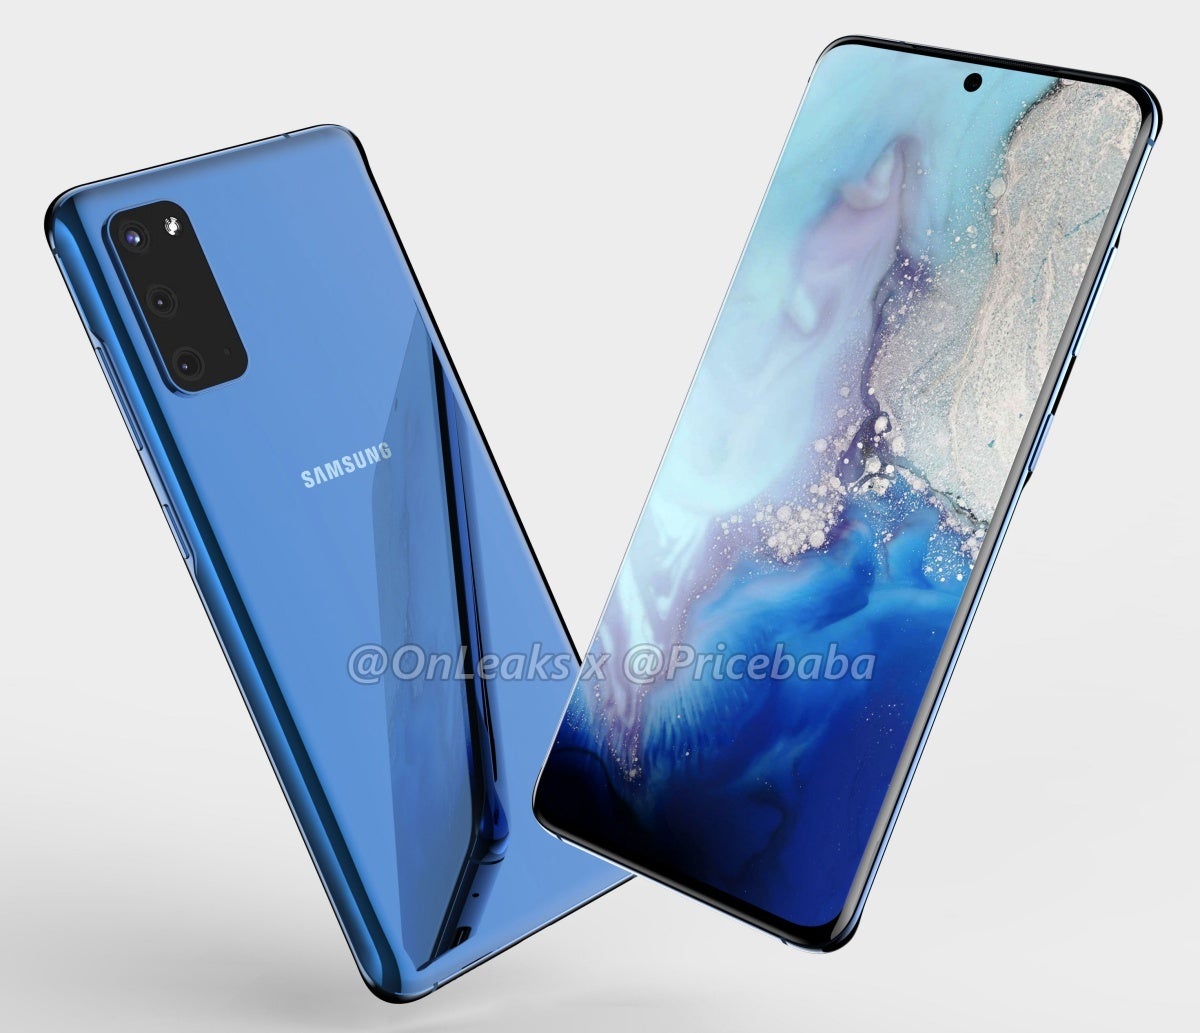 Leaked Galaxy S11e renders - Samsung is about to make a big mistake with the Galaxy S11e